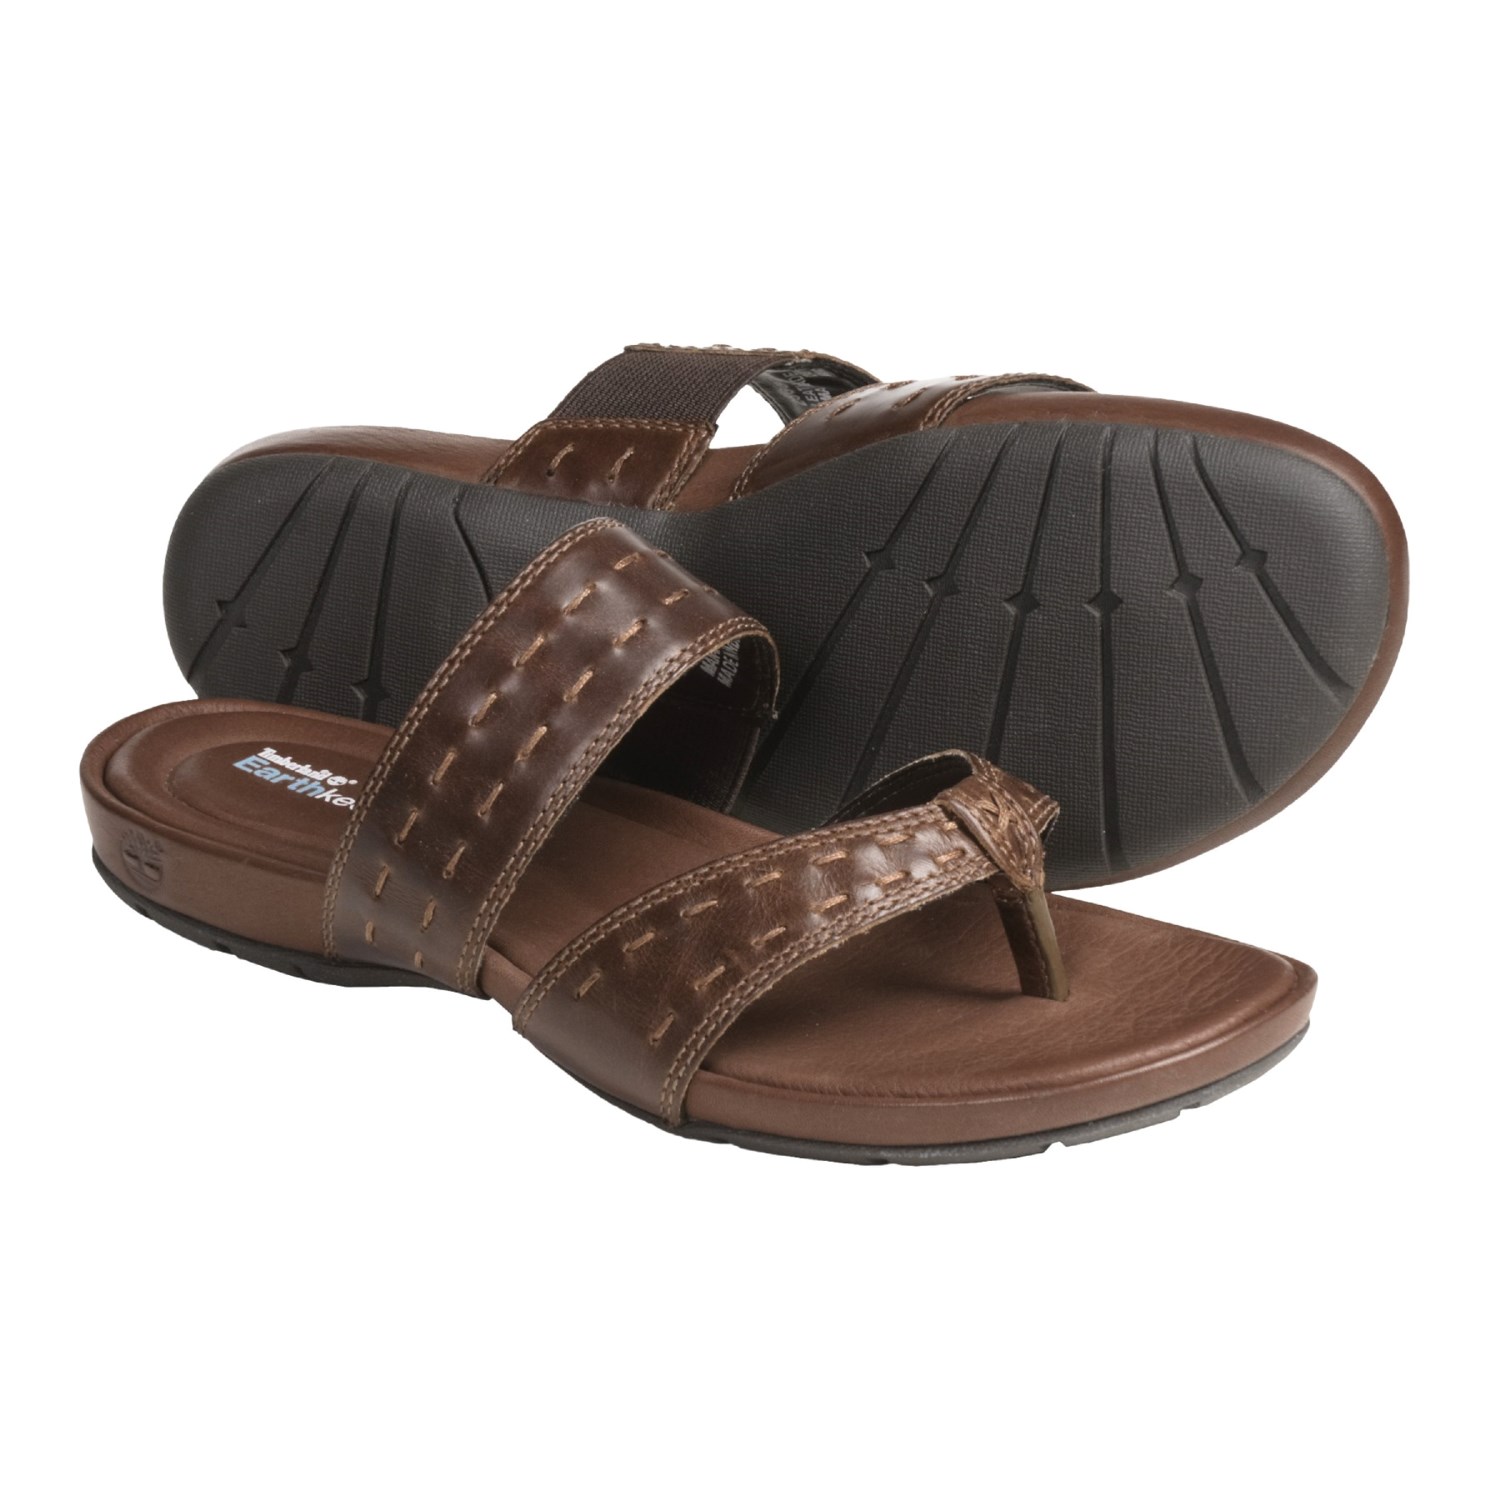 Timberland Pleasant Bay Sandals - Leather Thongs, Recycled Materials ...